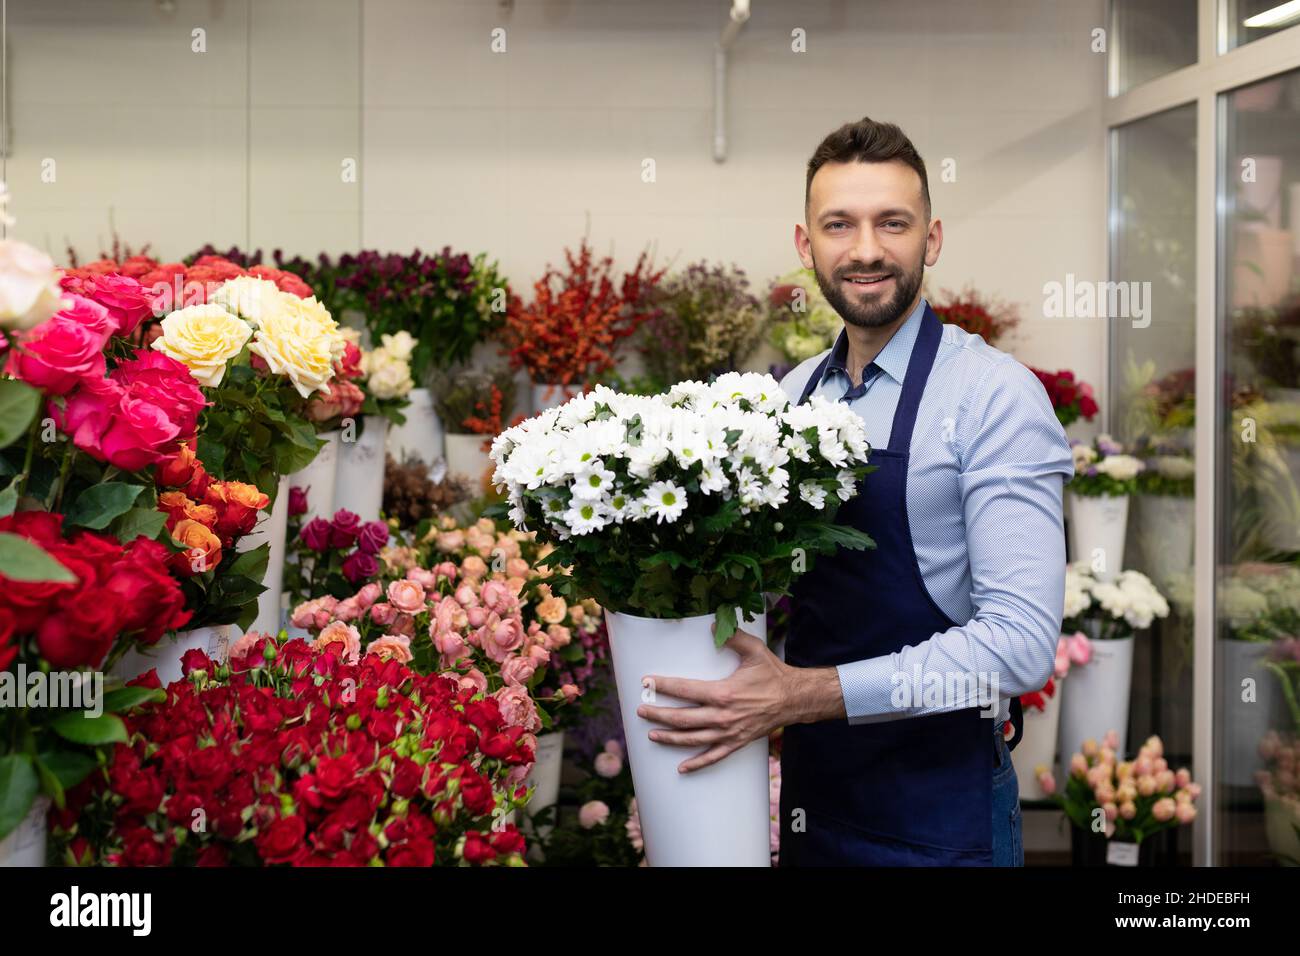 a man florist in the refrigerator among fresh flowers holding a vase with live plants in his hands looks at the camera with a smile Stock Photo